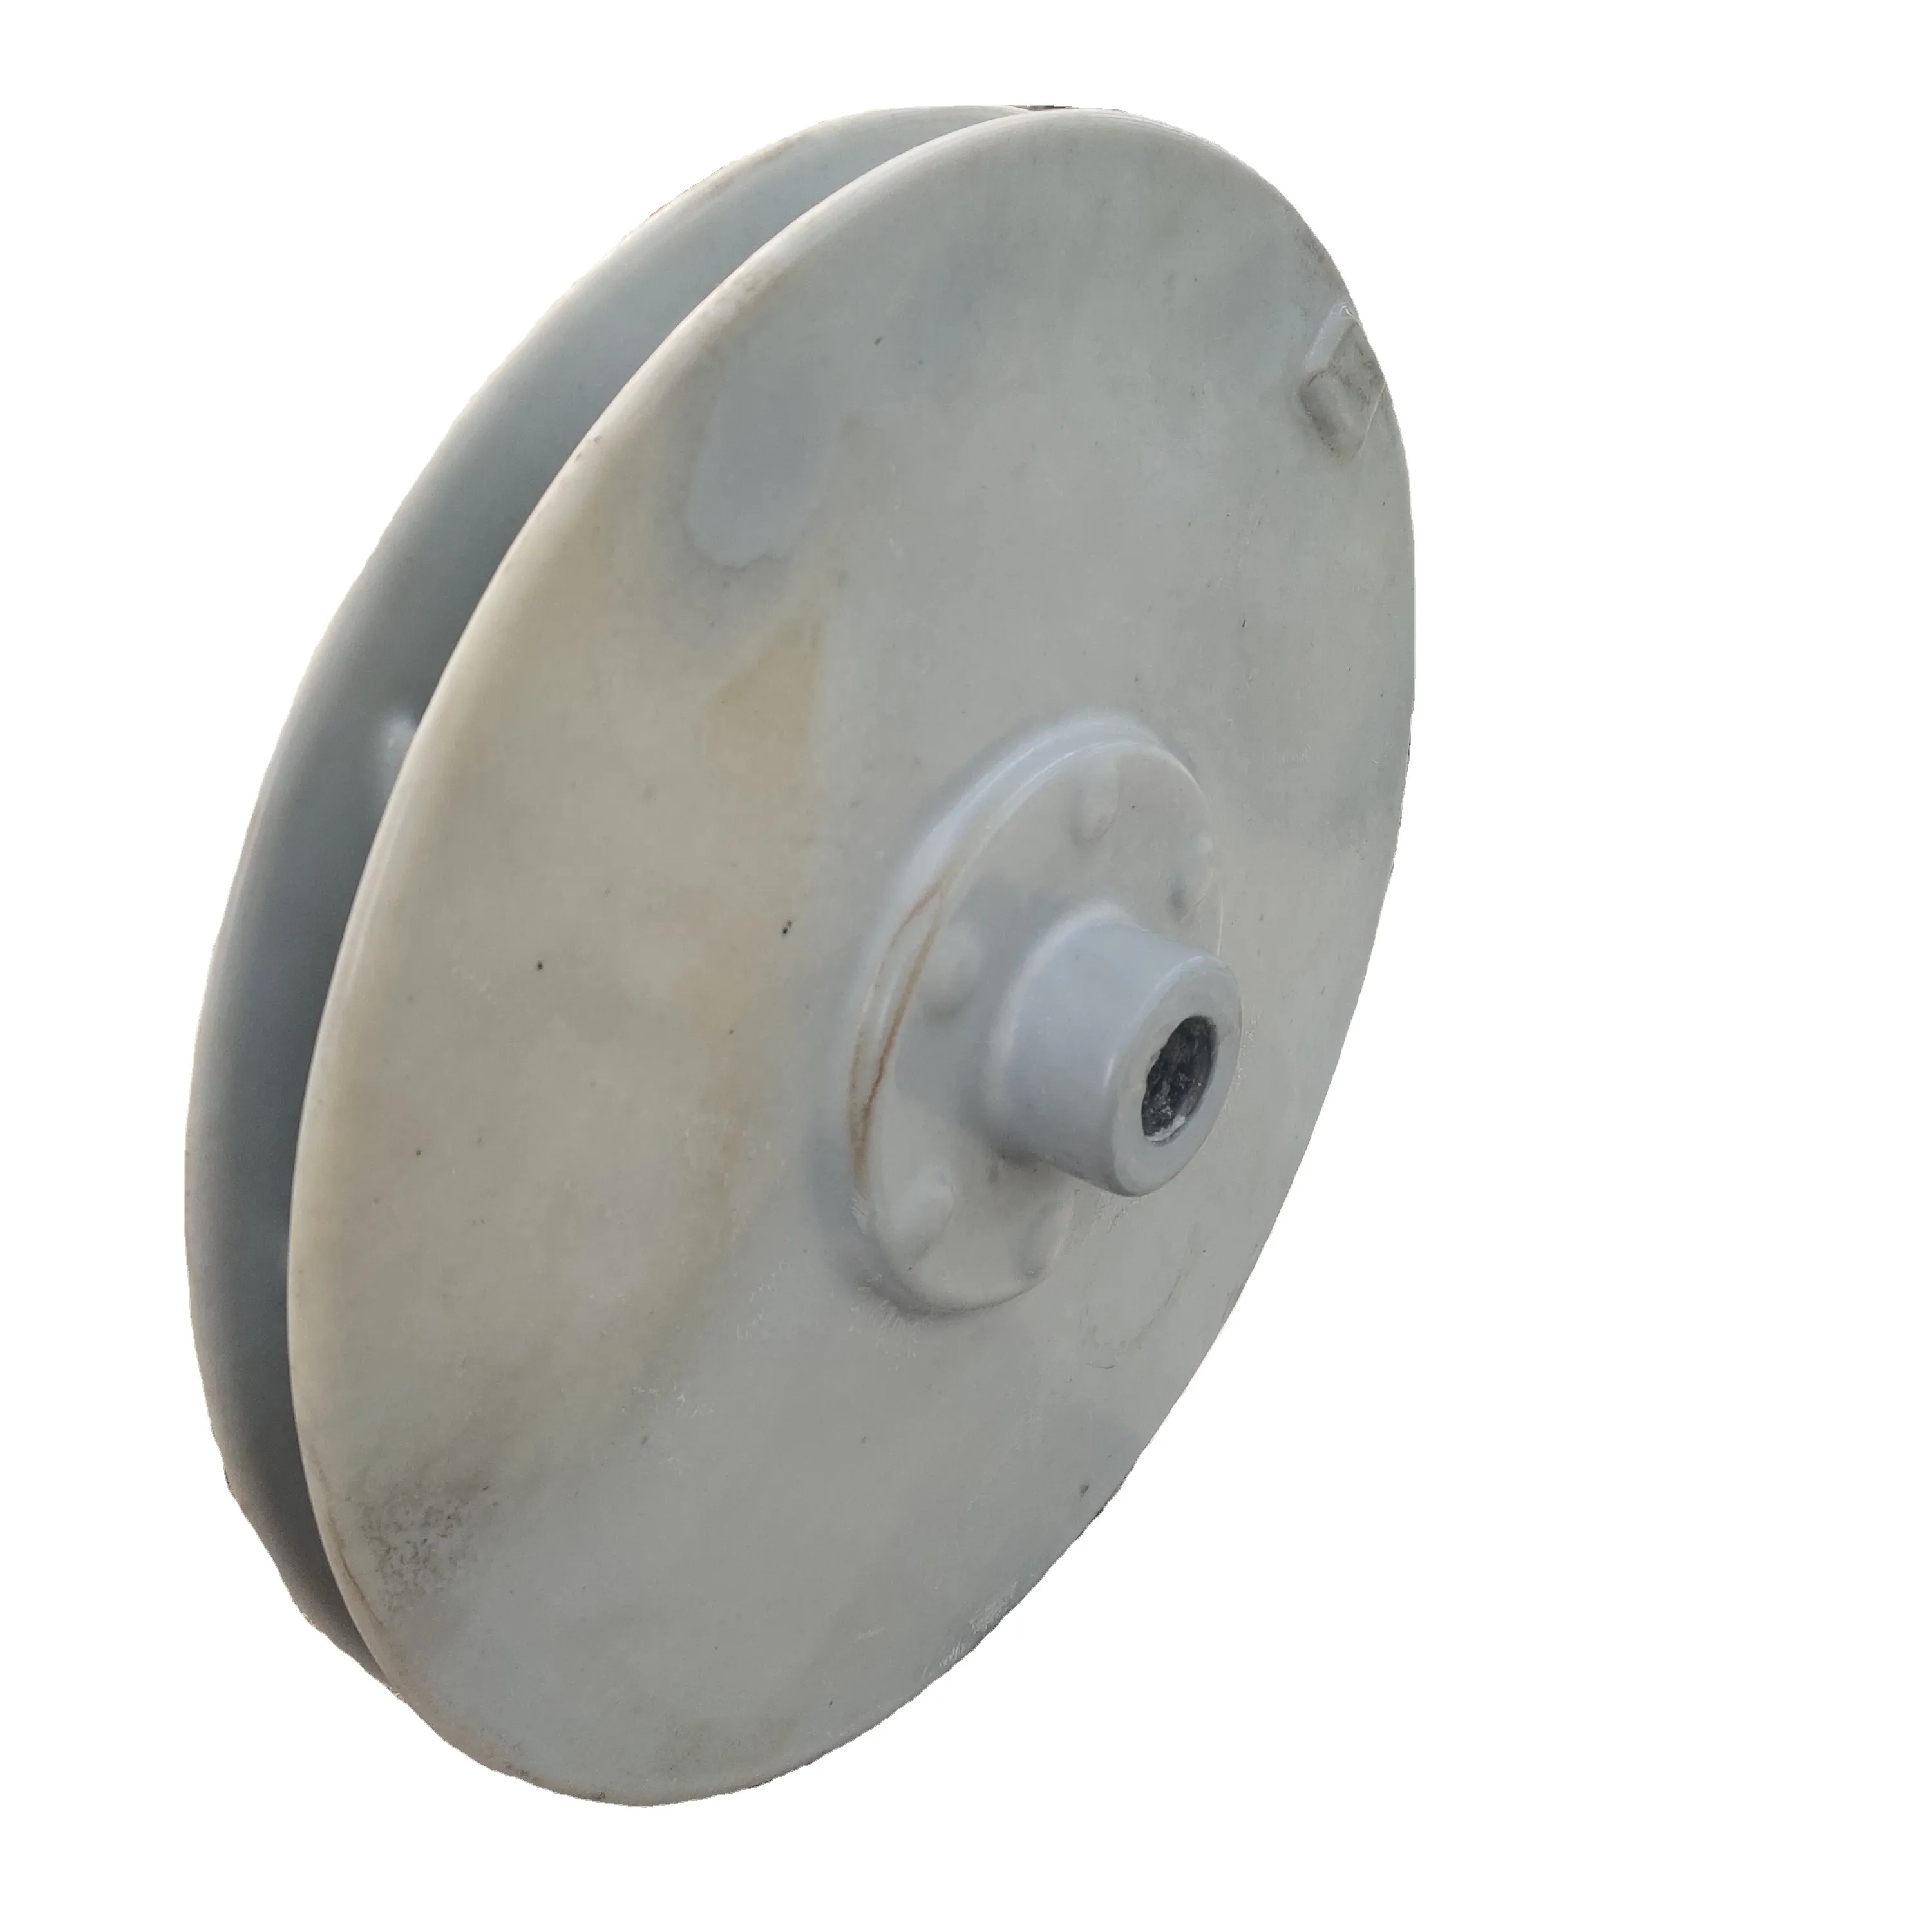 China Industrial plastic-lined fan impeller for centrifugal blower fans hot selling